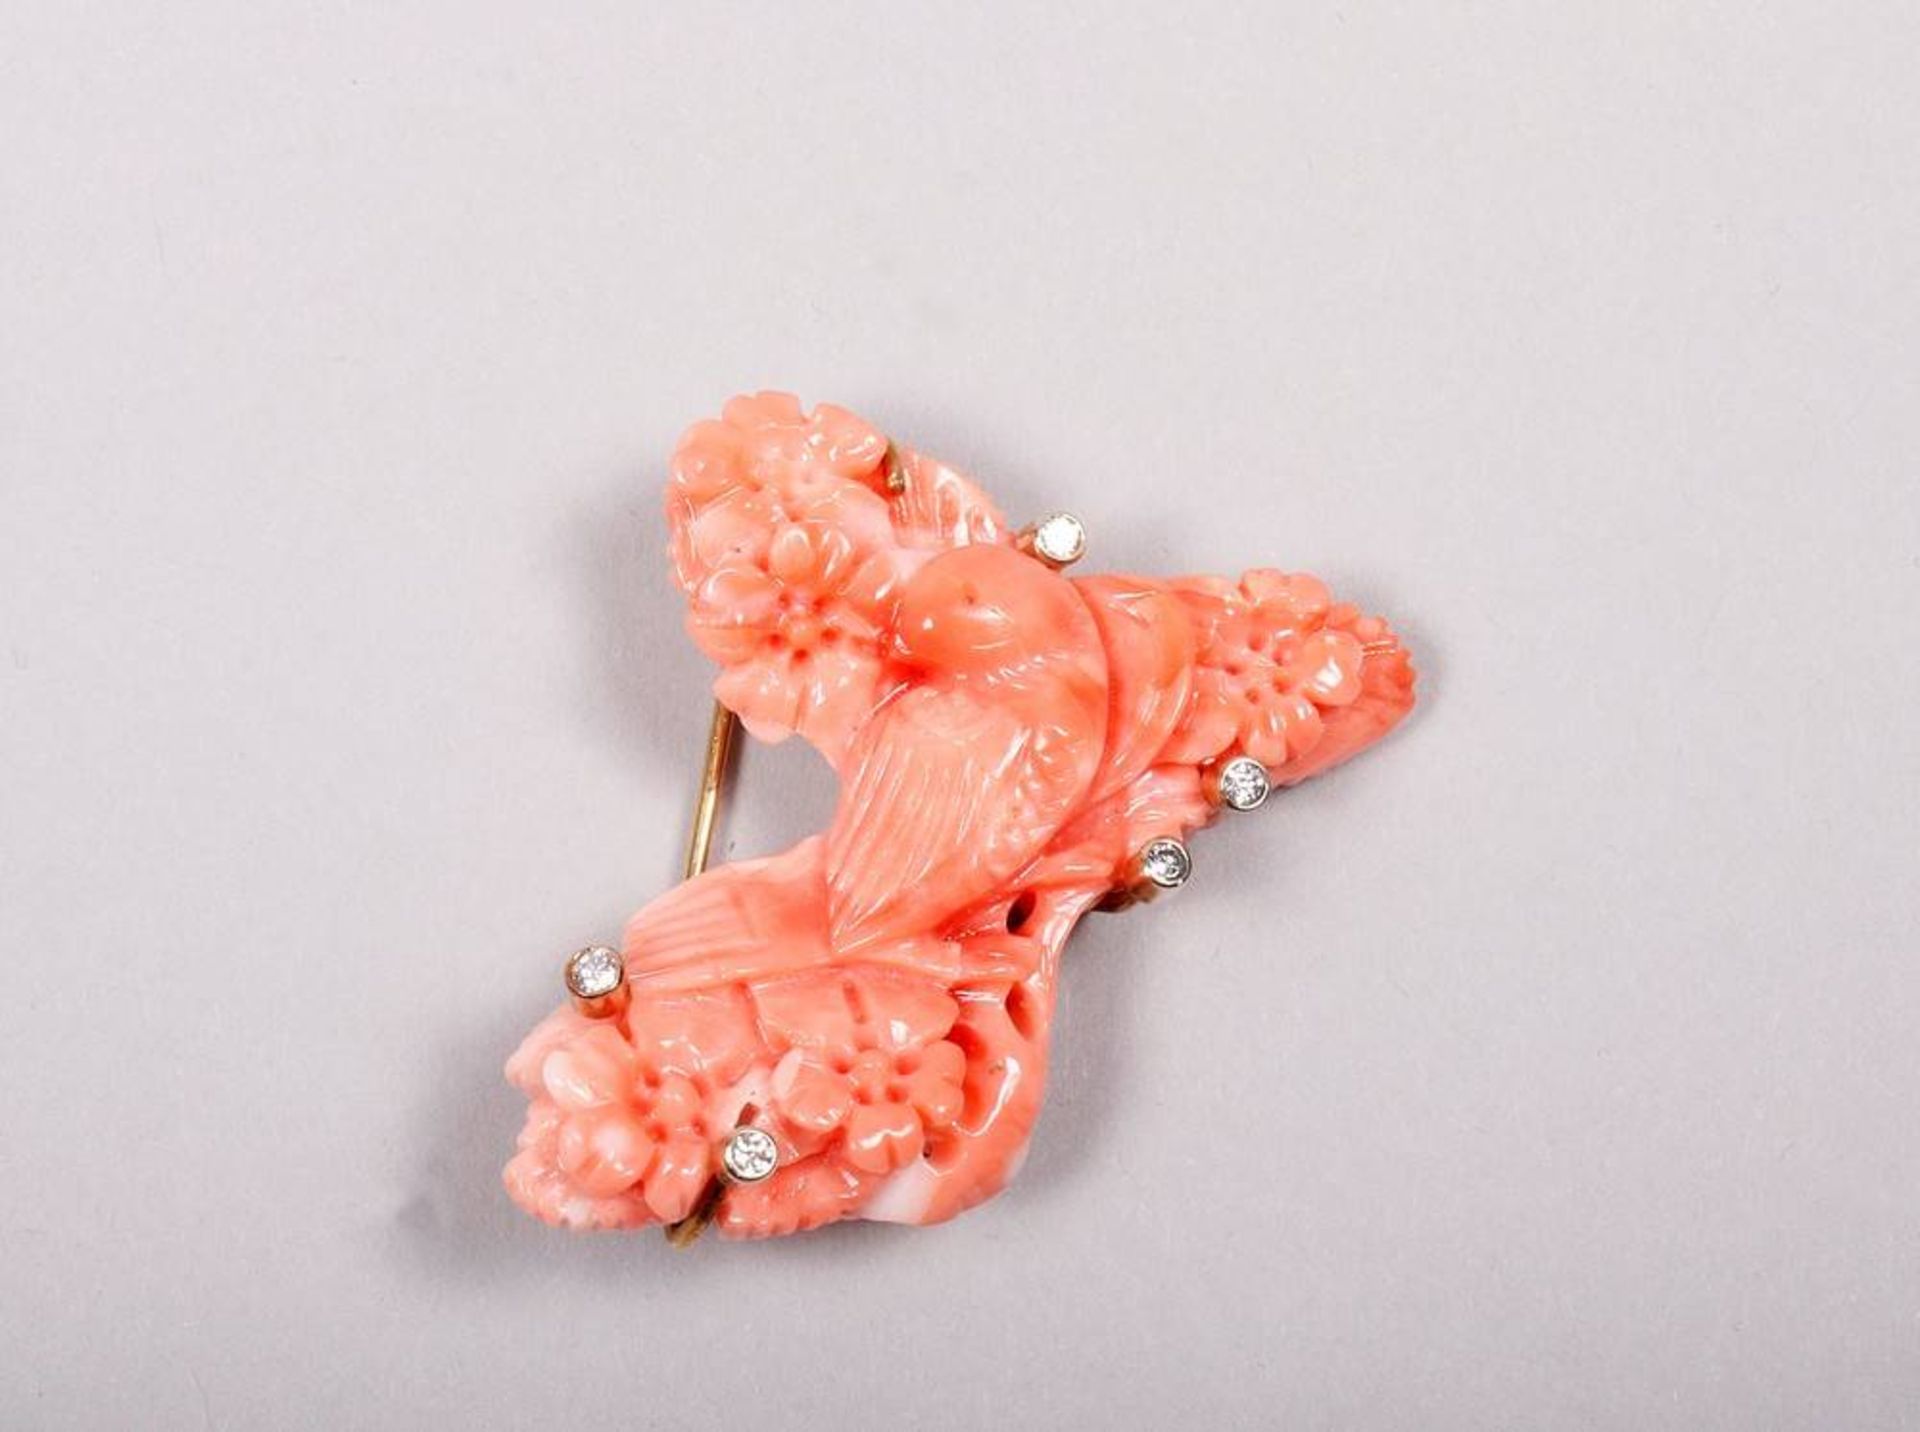 Bird brooch585 gold /coral, bird surrounded by flowers, 5 small brilliant cut diamonds, H: 3,5cm,